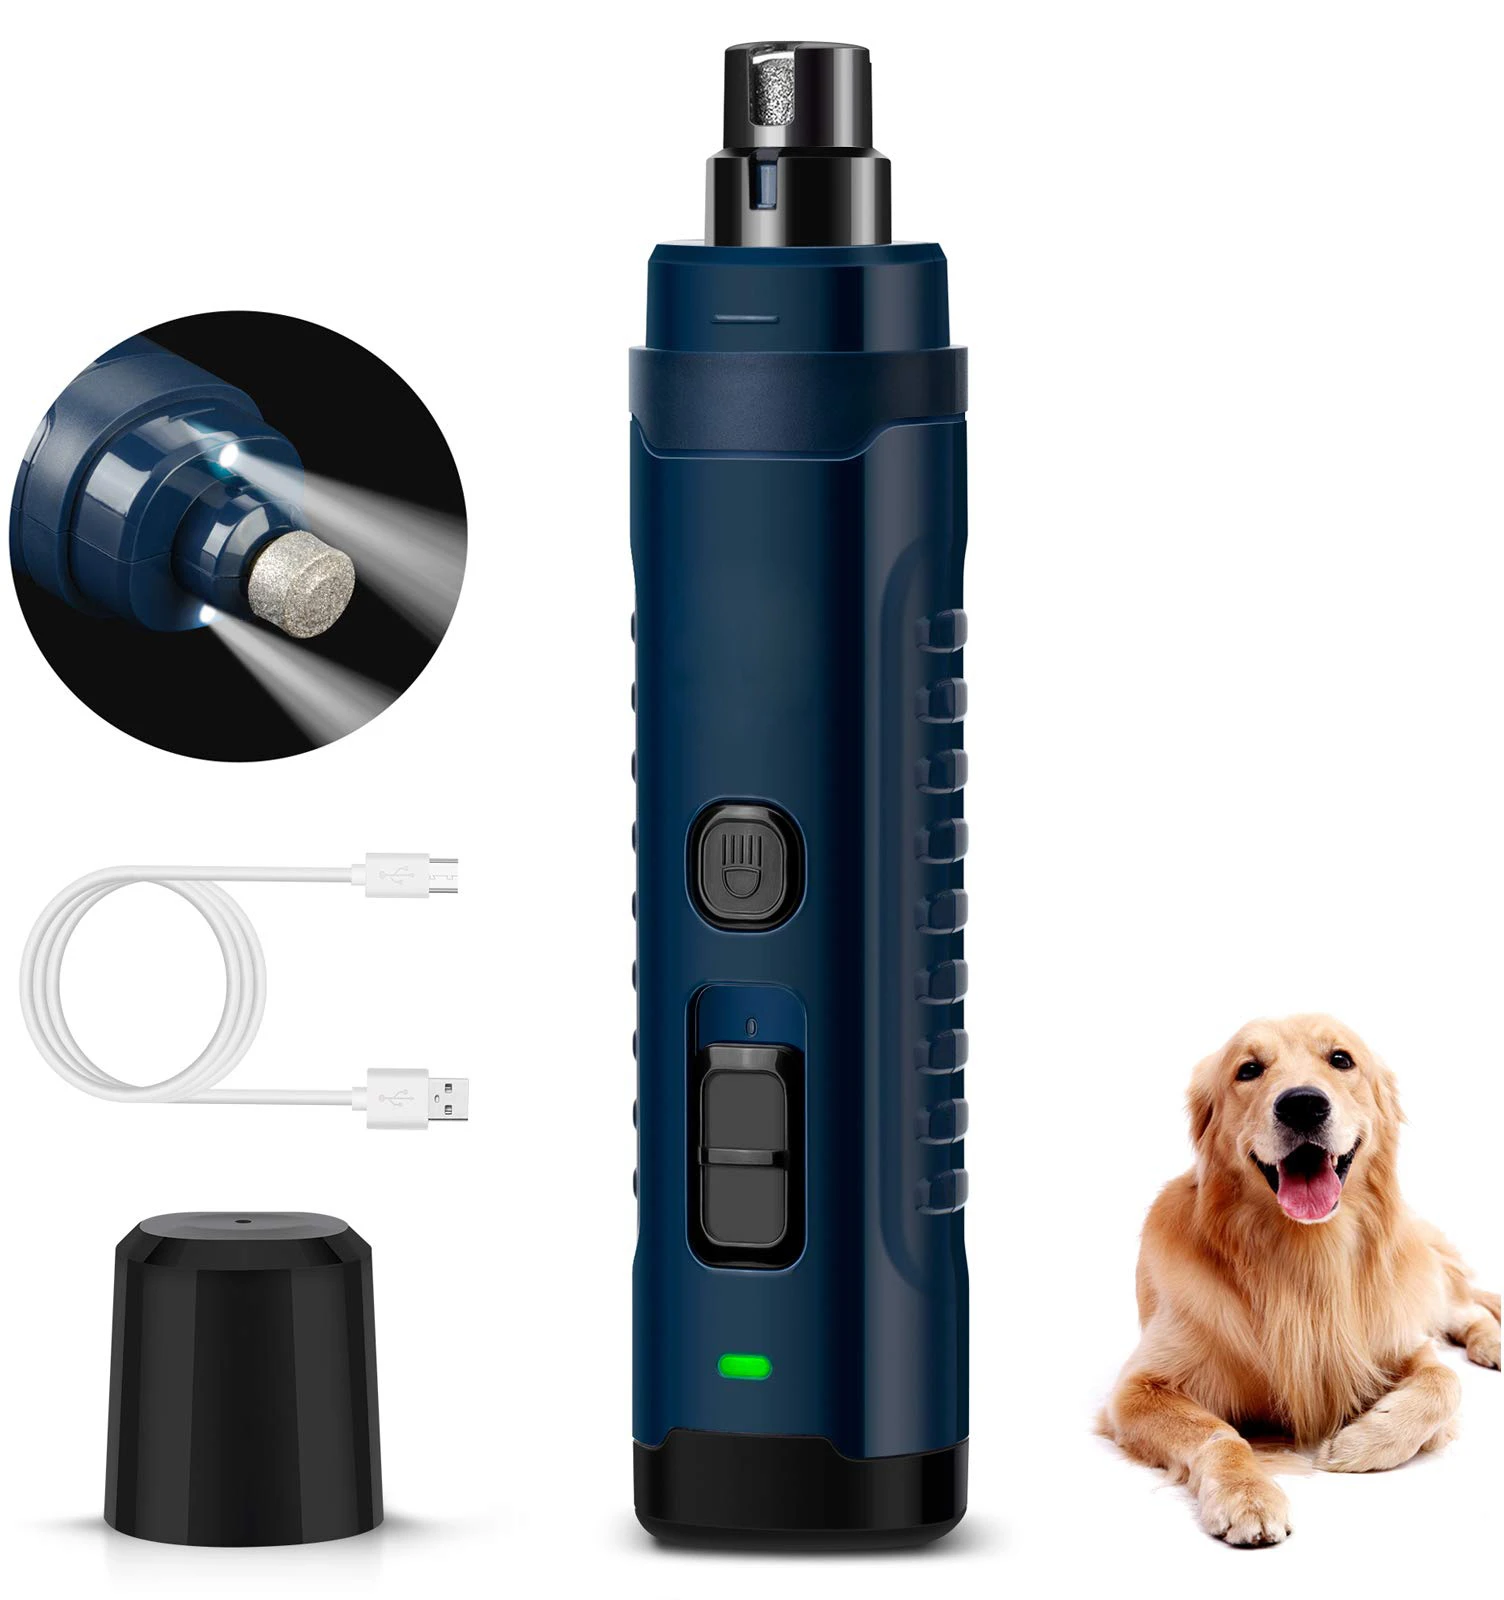 2021 Newest Dog Nail Grinder with 2 LED Light - [Enhanced 4.8V Motor 3X More Powerful] 2-Speed Rechargeable Electric Pet Trimmer